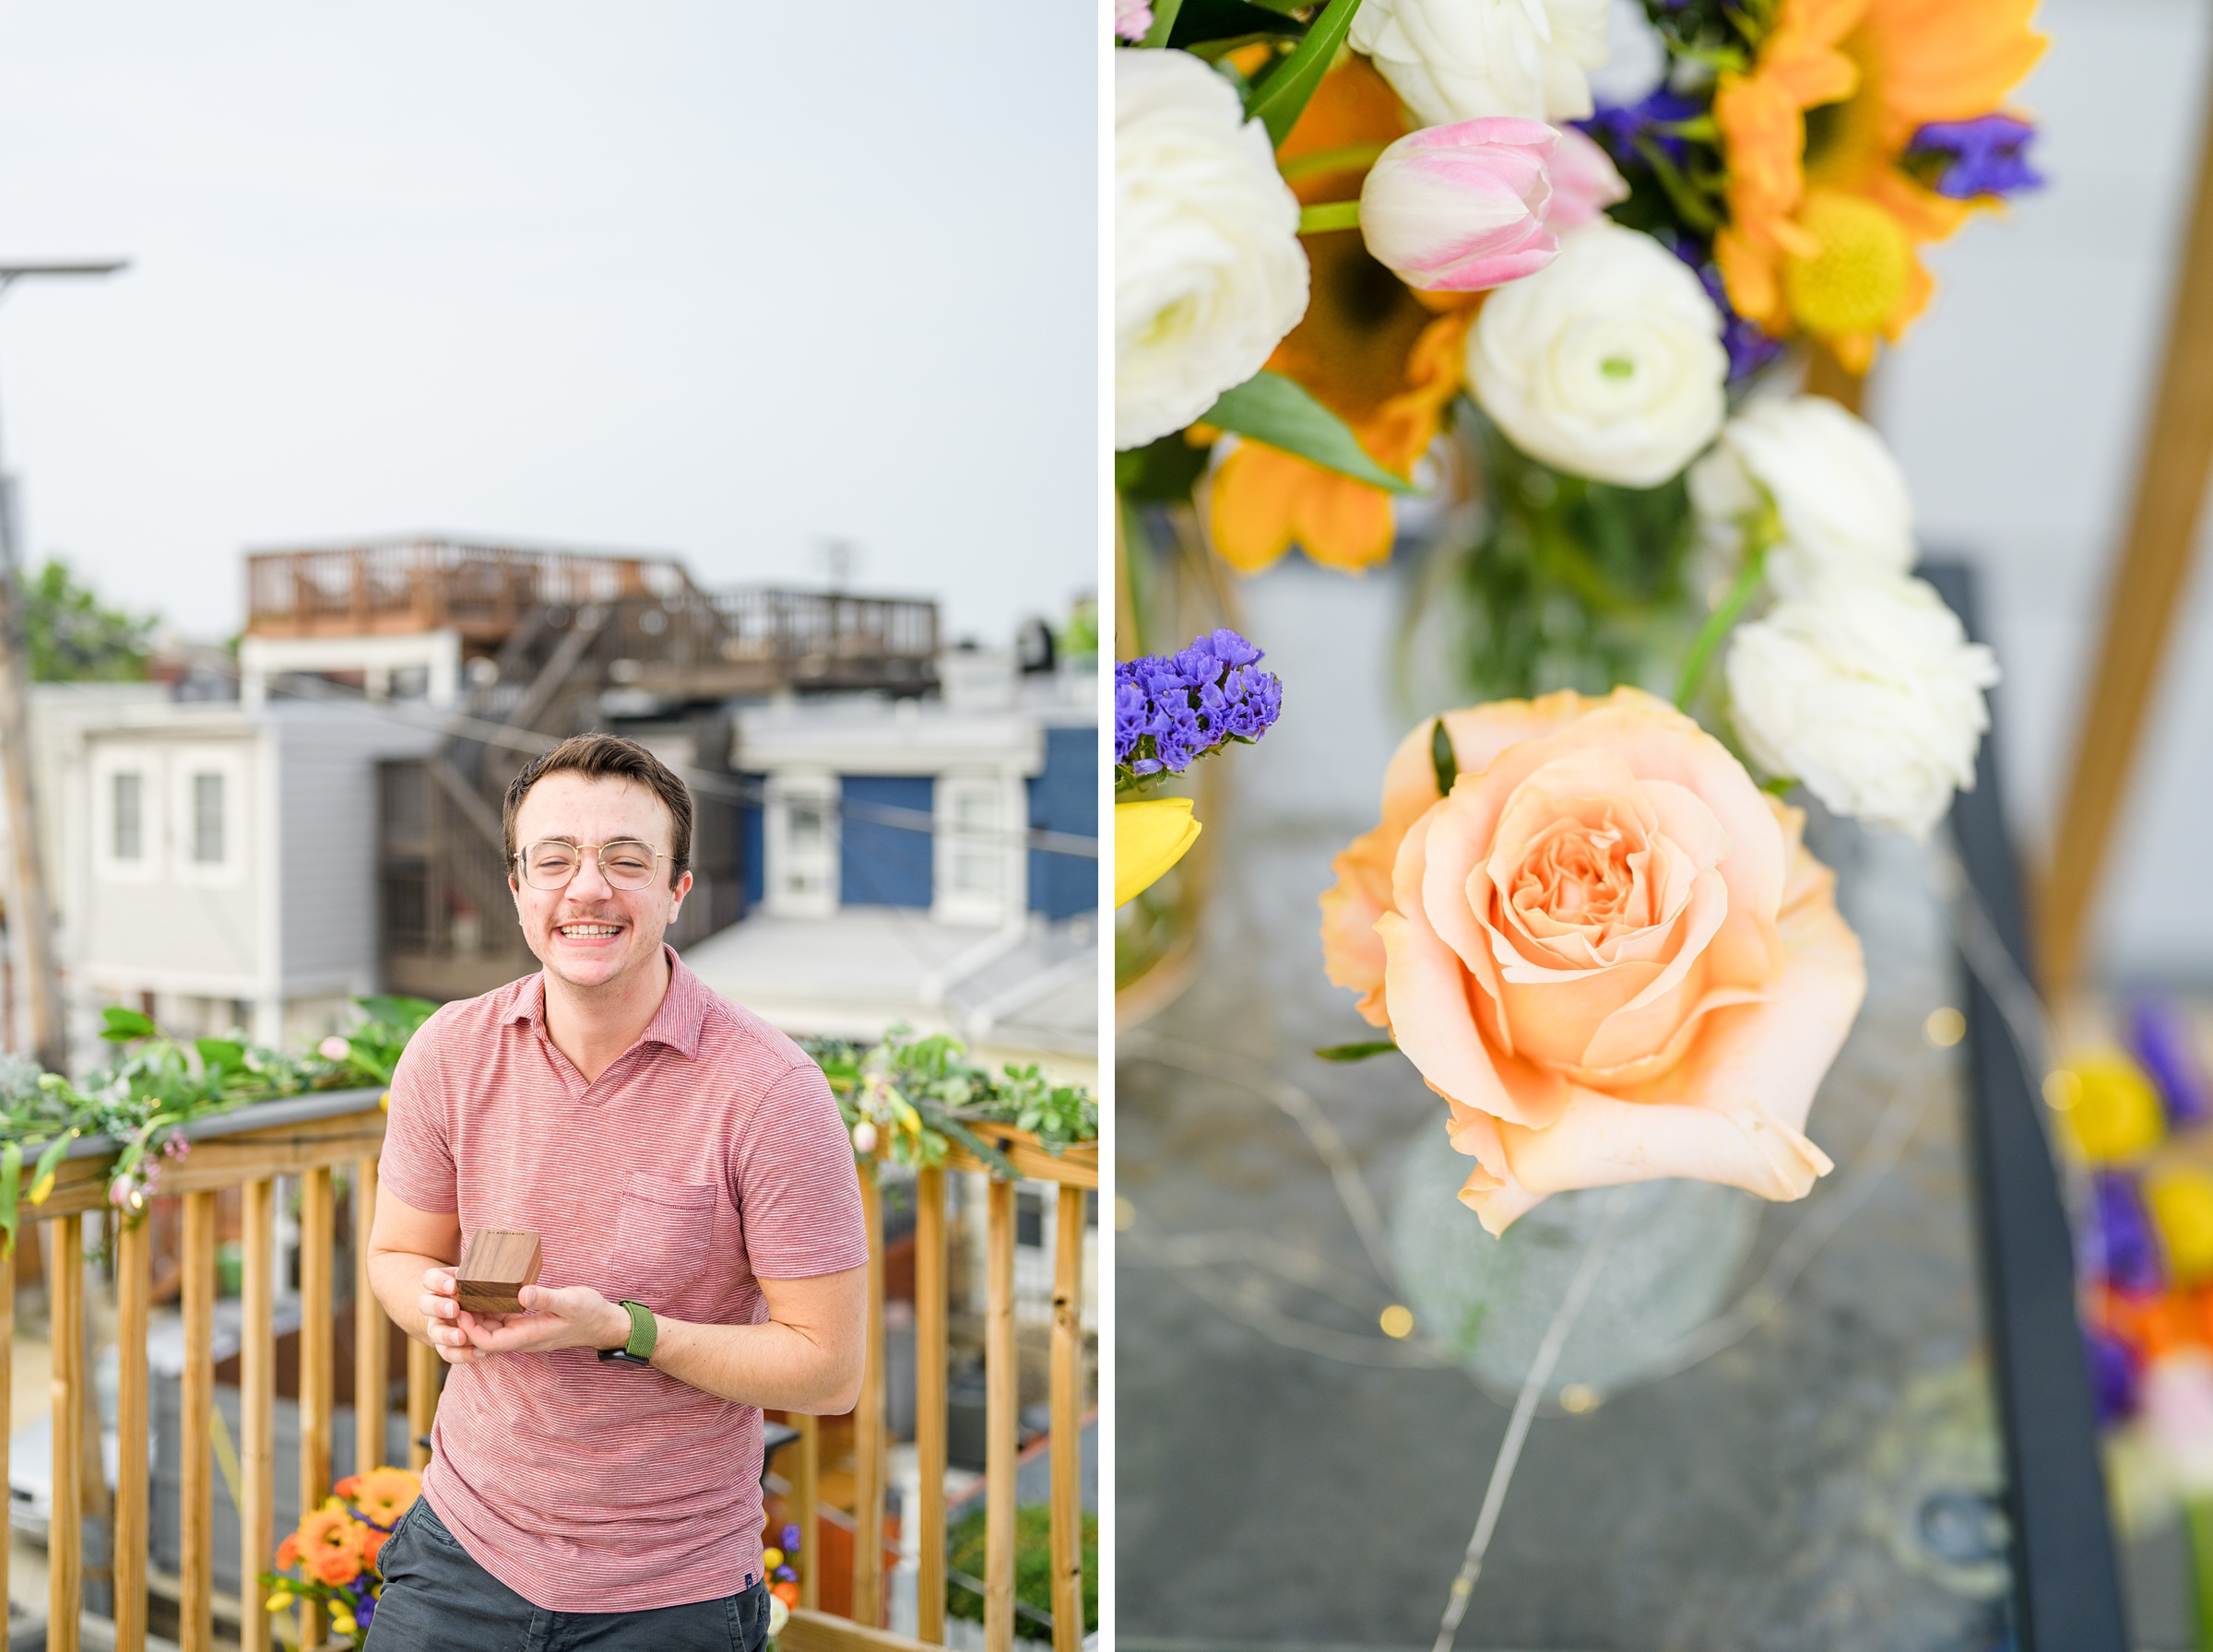 Sarah and Brenton's surprise proposal at their apartment rooftop in Baltimore, Maryland photographed by Baltimore Wedding Photographer Cait Kramer.